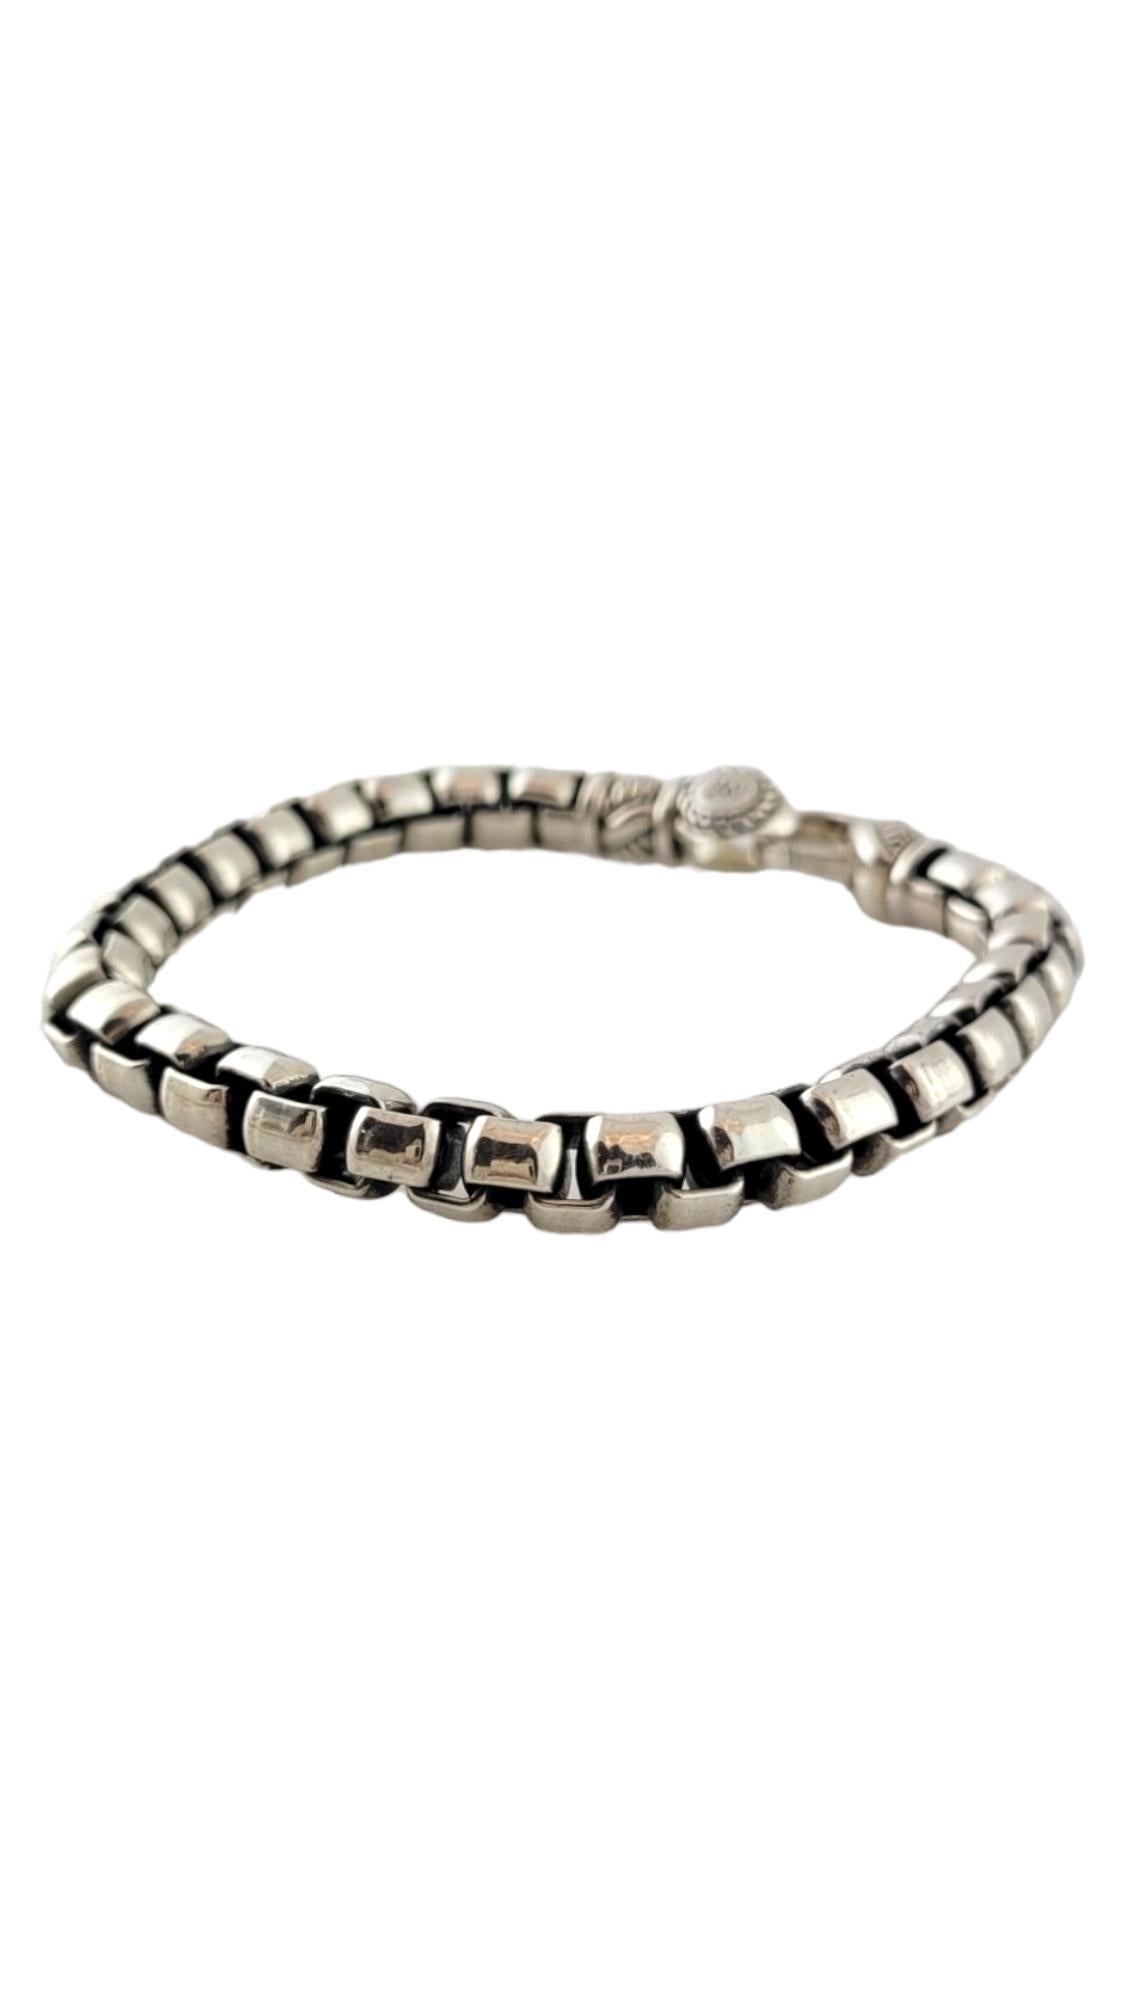 John Hardy JAi Sterling Silver Round Box Link Bracelet

This gorgeous round box link bracelet is crafted from sterling silver by designer John Hardy!

Size: 7.25